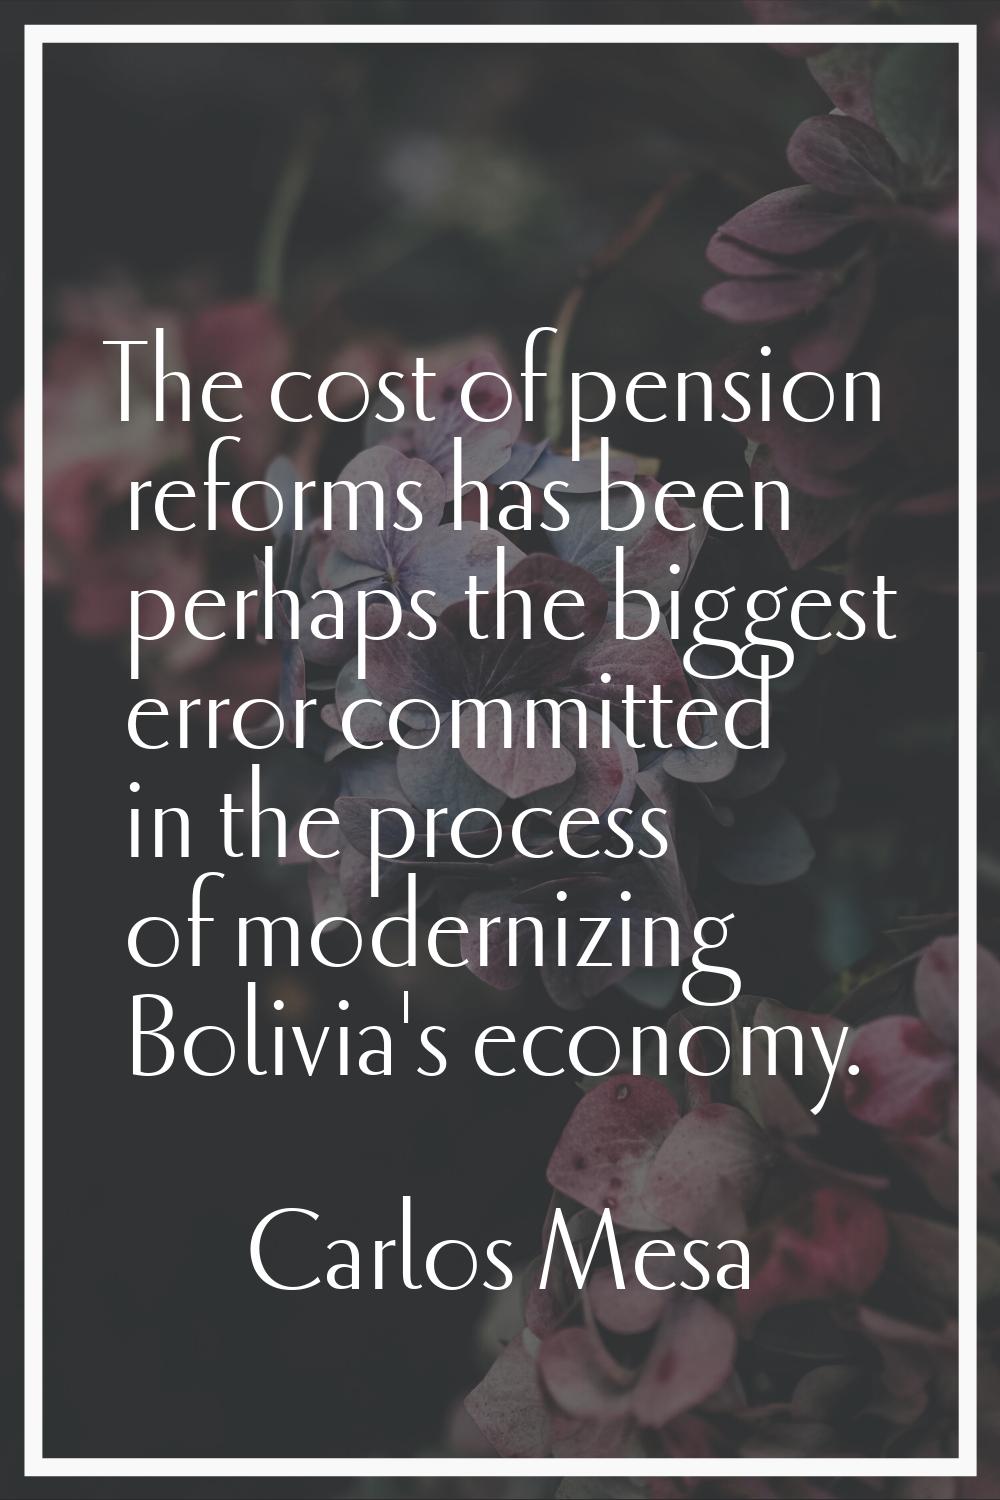 The cost of pension reforms has been perhaps the biggest error committed in the process of moderniz